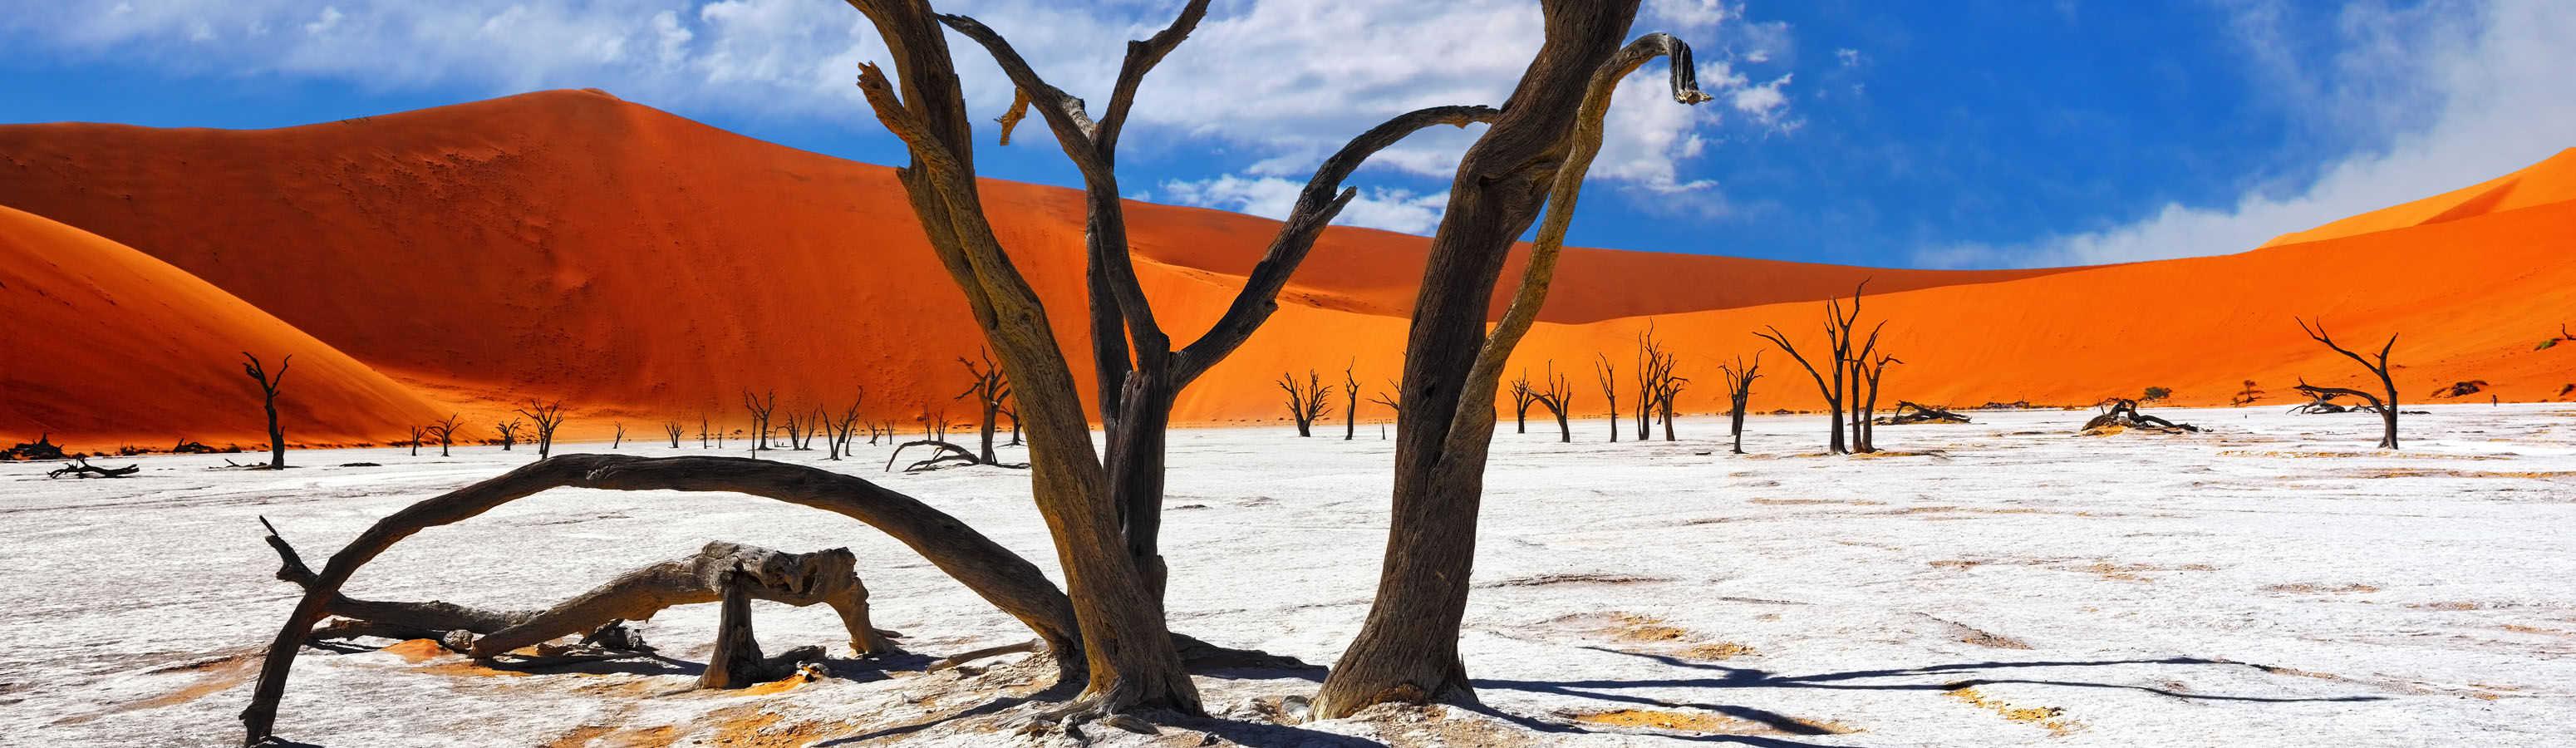 The most beautiful deserts in the world that you must see